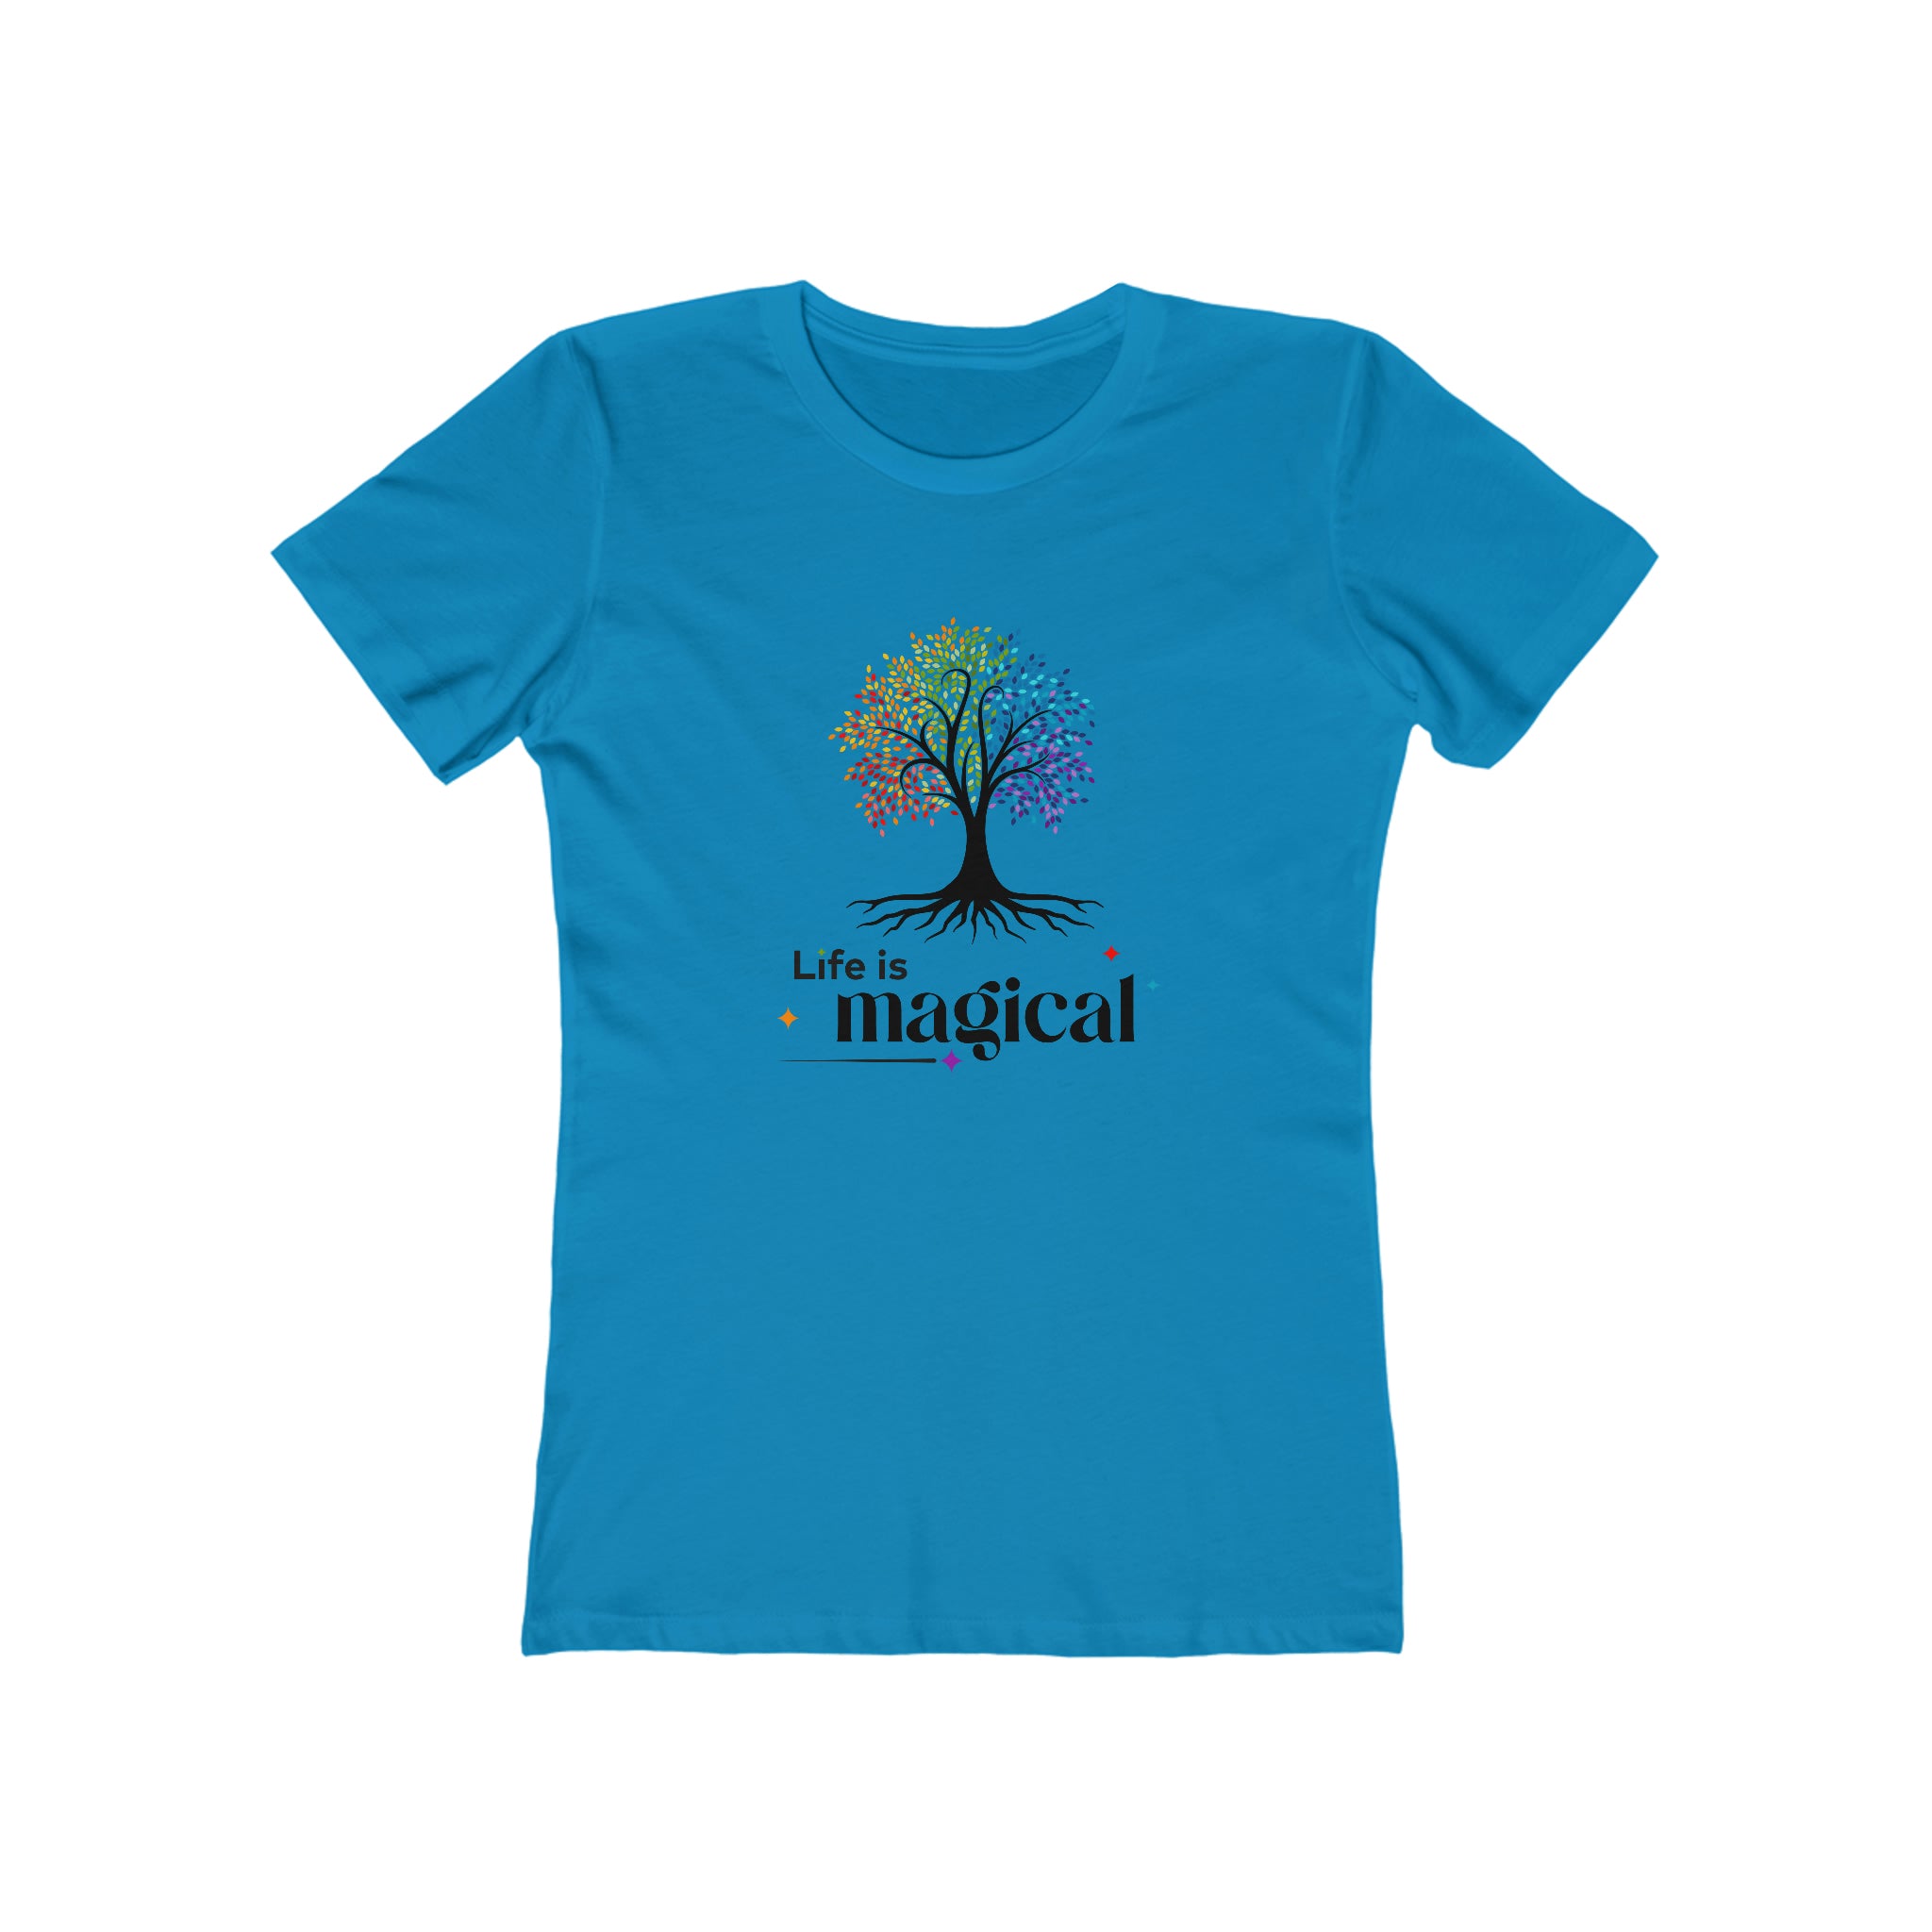 Life is Magical - The Tree : Women's 100% Cotton T-Shirt